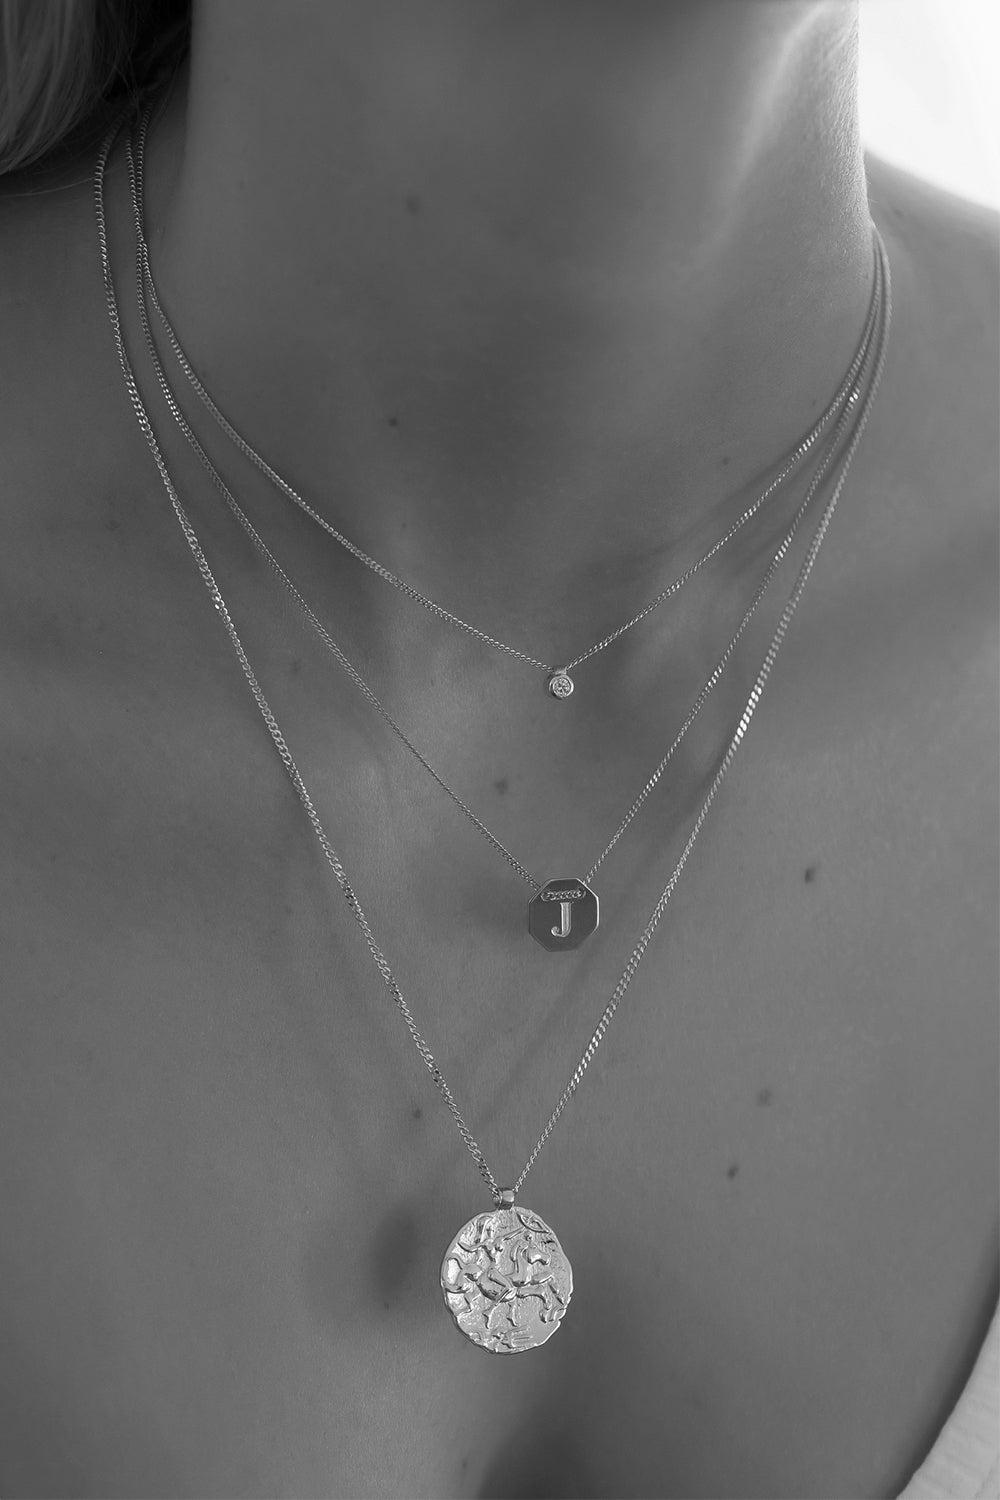 Coin Necklace | Silver or 9K White Gold